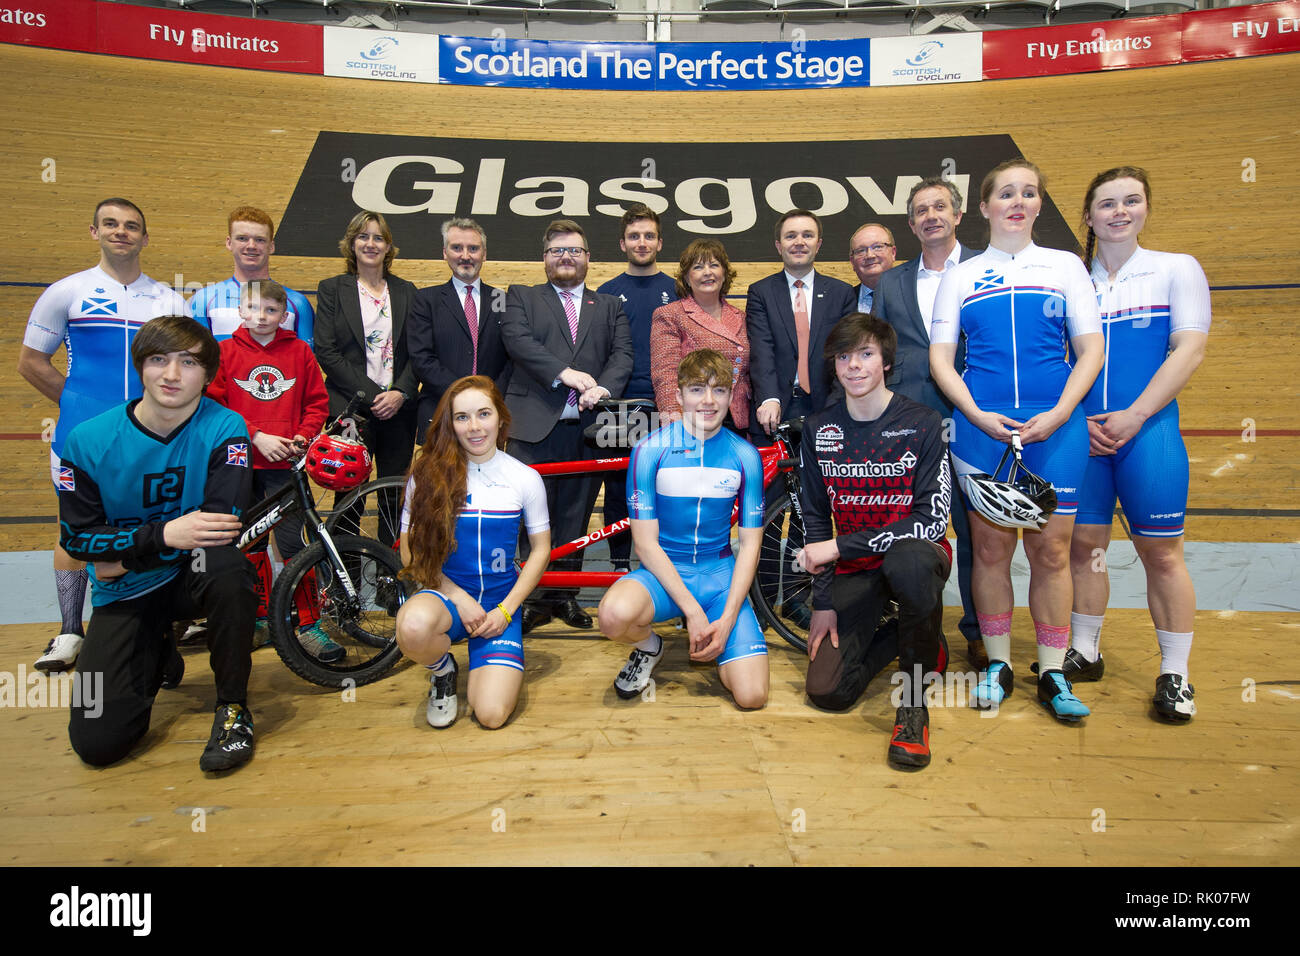 Glasgow, UK. 8 Feb 2019. (L-R) (L-R) Dame Katherine Grainger; Frank Slevin - Chair of British Cycling; Councillor David McDonald of Glasgow City Council; Callum Skinner - Olympic Silver Medalist; Fiona Hyslop MSP - Cabinet Secretary for Culture, Tourism and External Affairs; David Lappartient is the president of the Union Cycliste Internationale;  Paul Bush OBE -  VisitScotland’s Director of Events, Tom Bishop along with Riders from the Scottish Performance Development and Local Clubs. Credit: Colin Fisher/Alamy Live News Stock Photo